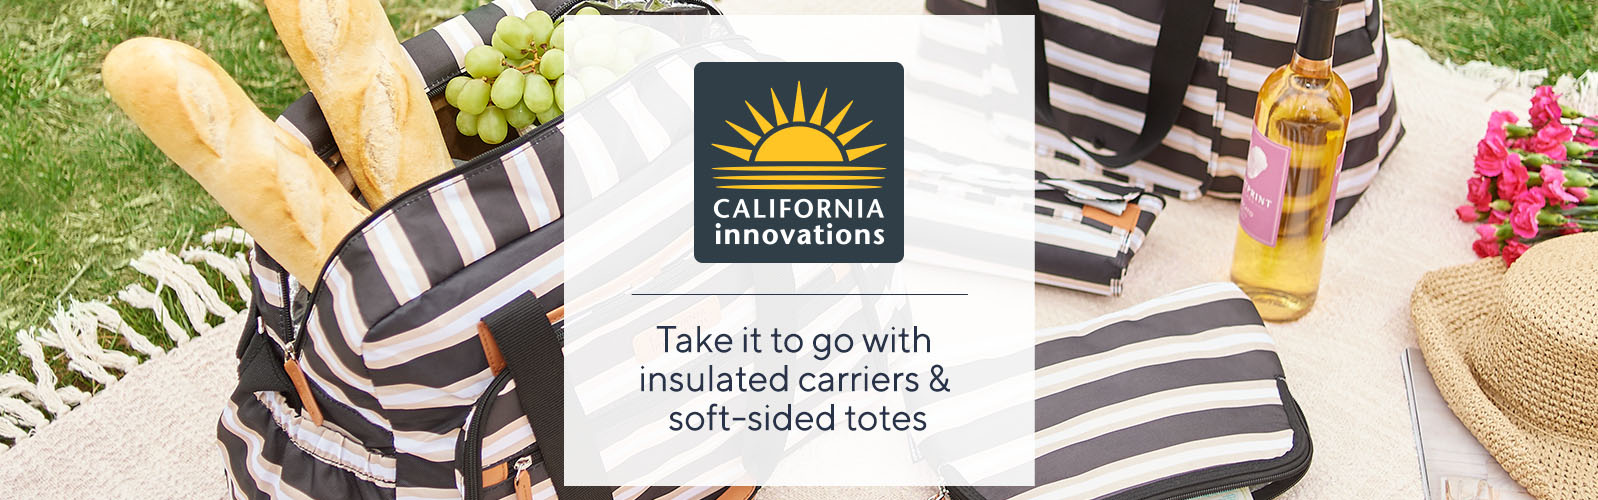 California Innovations Take it to go with insulated carriers & soft-sided totes